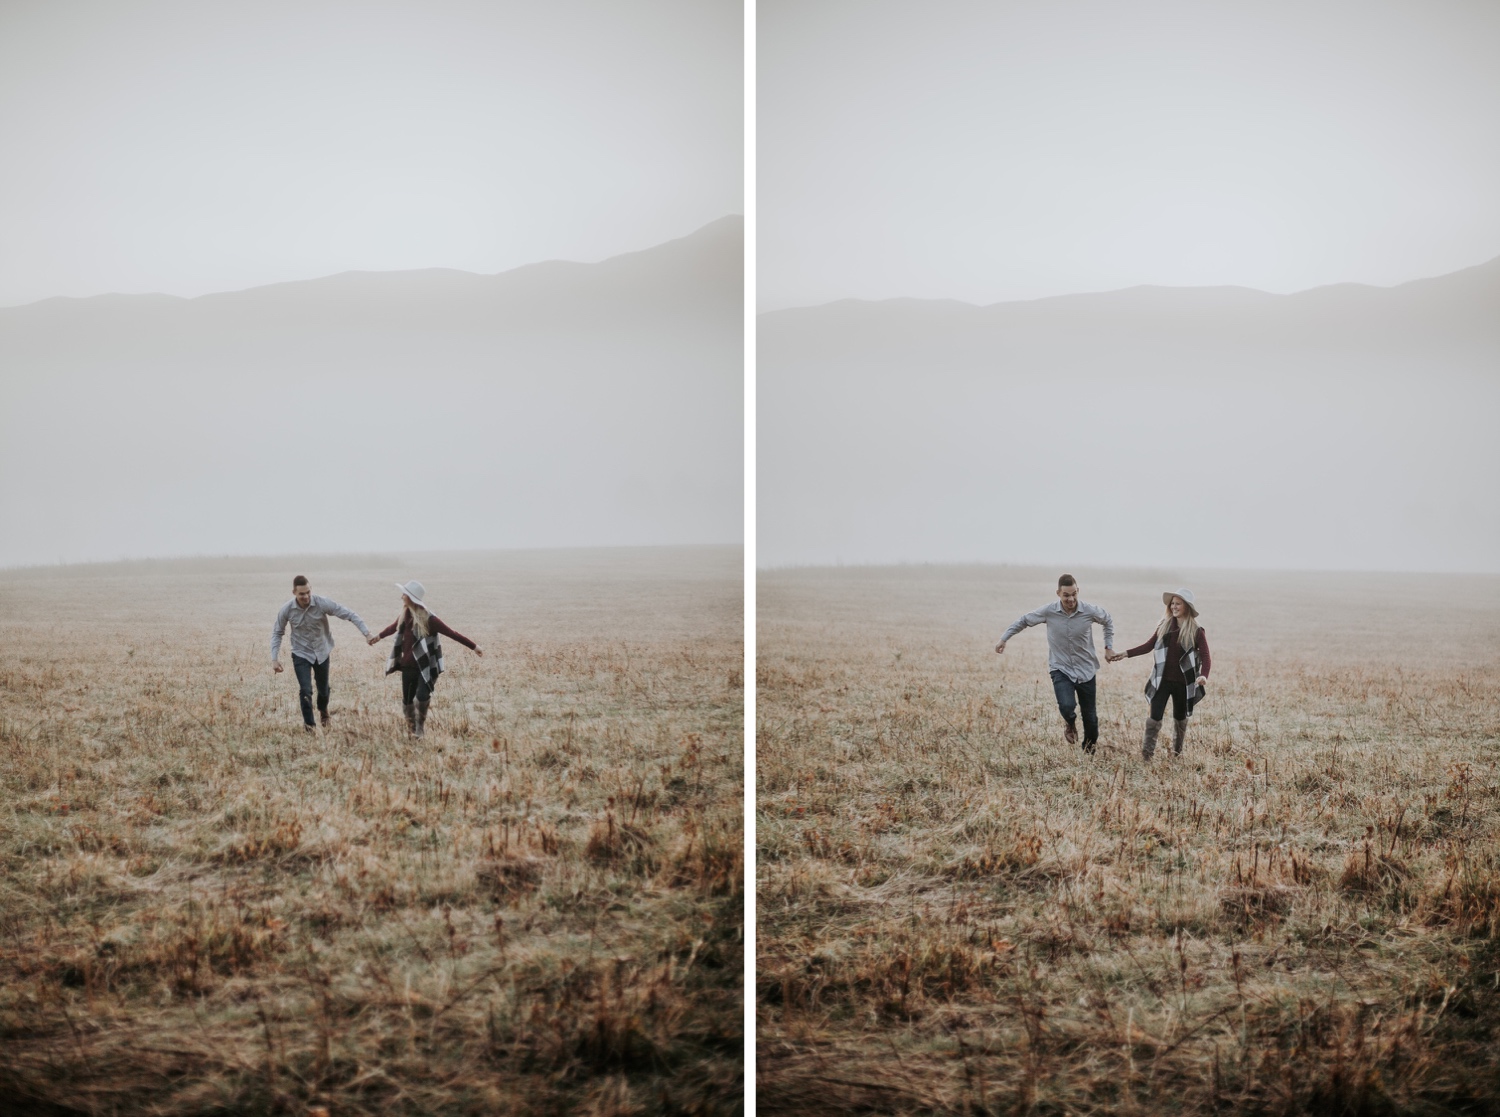 Cades Cove Engagement Photography Gatlinburg Tennessee Photographers Pigeon Forge Smoky Mountains